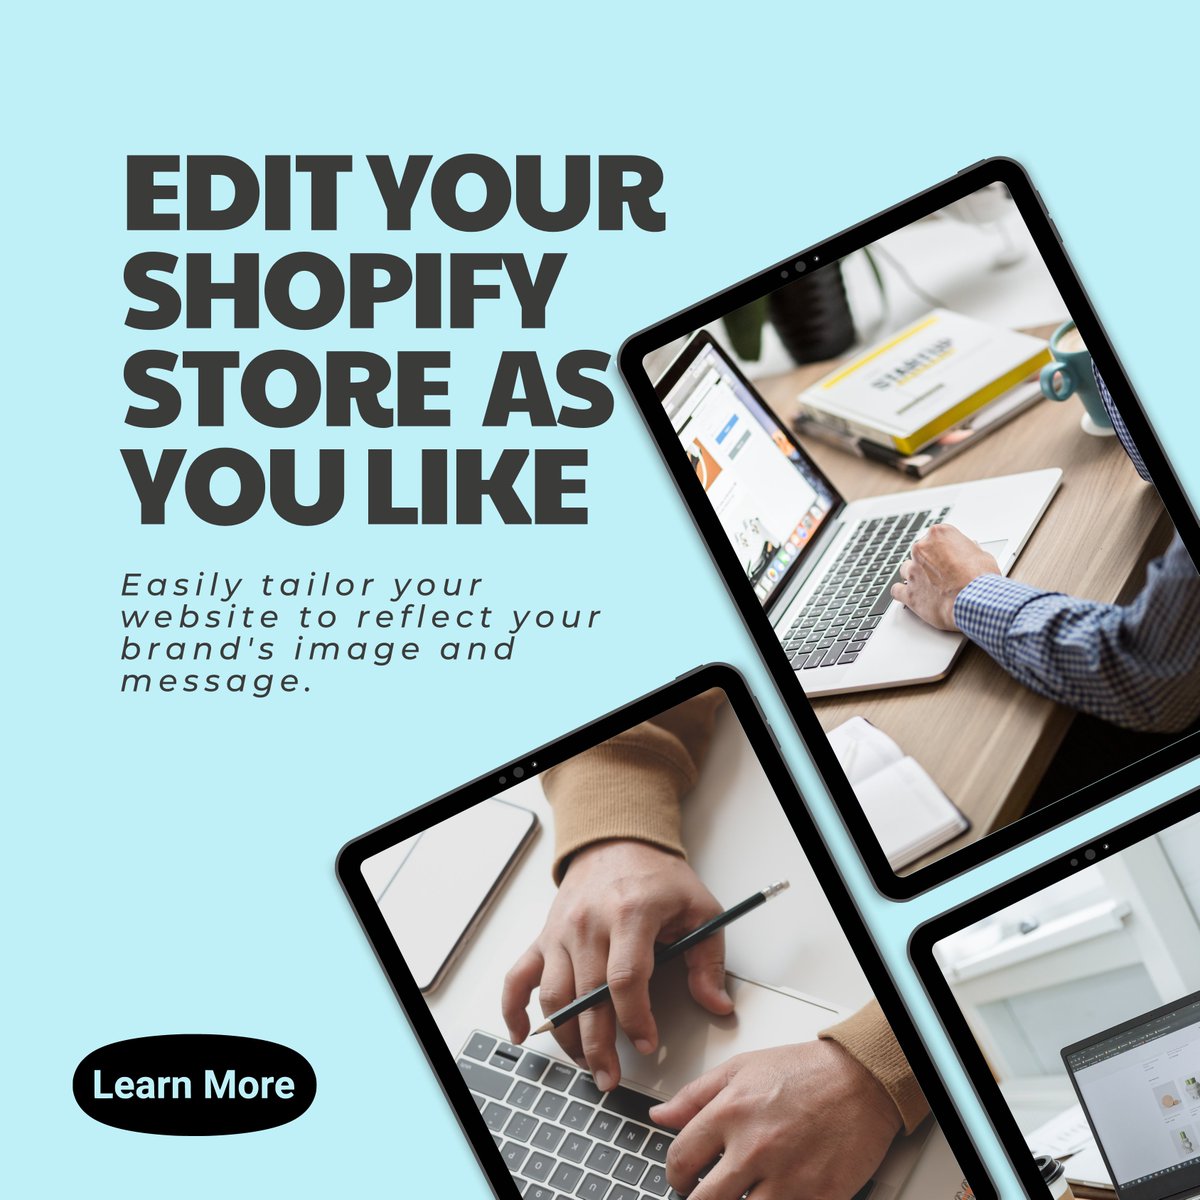 Customize your Shopify store to match your unique style! With endless editing options, you have the power to create a visually stunning and user-friendly online shop. Showcase your products like never before!

#ShopifyCustomization #OnlineStoreDesign #UnleashYourCreativity